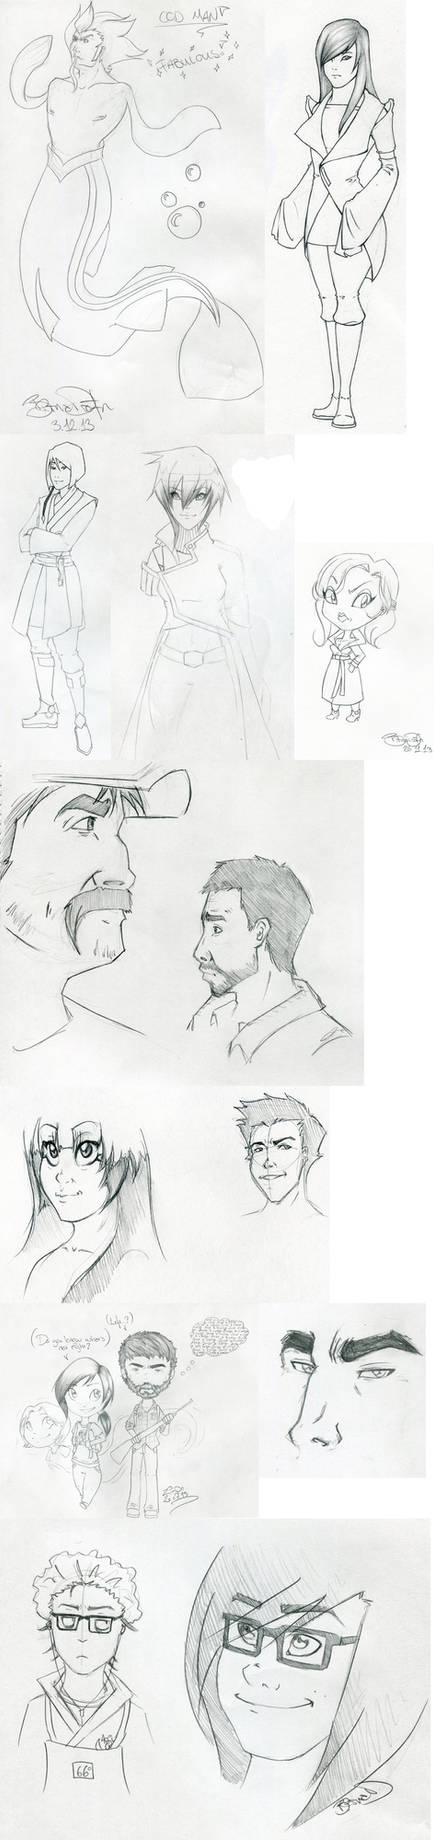 Sketch dump - contains Last of Us spoilers!